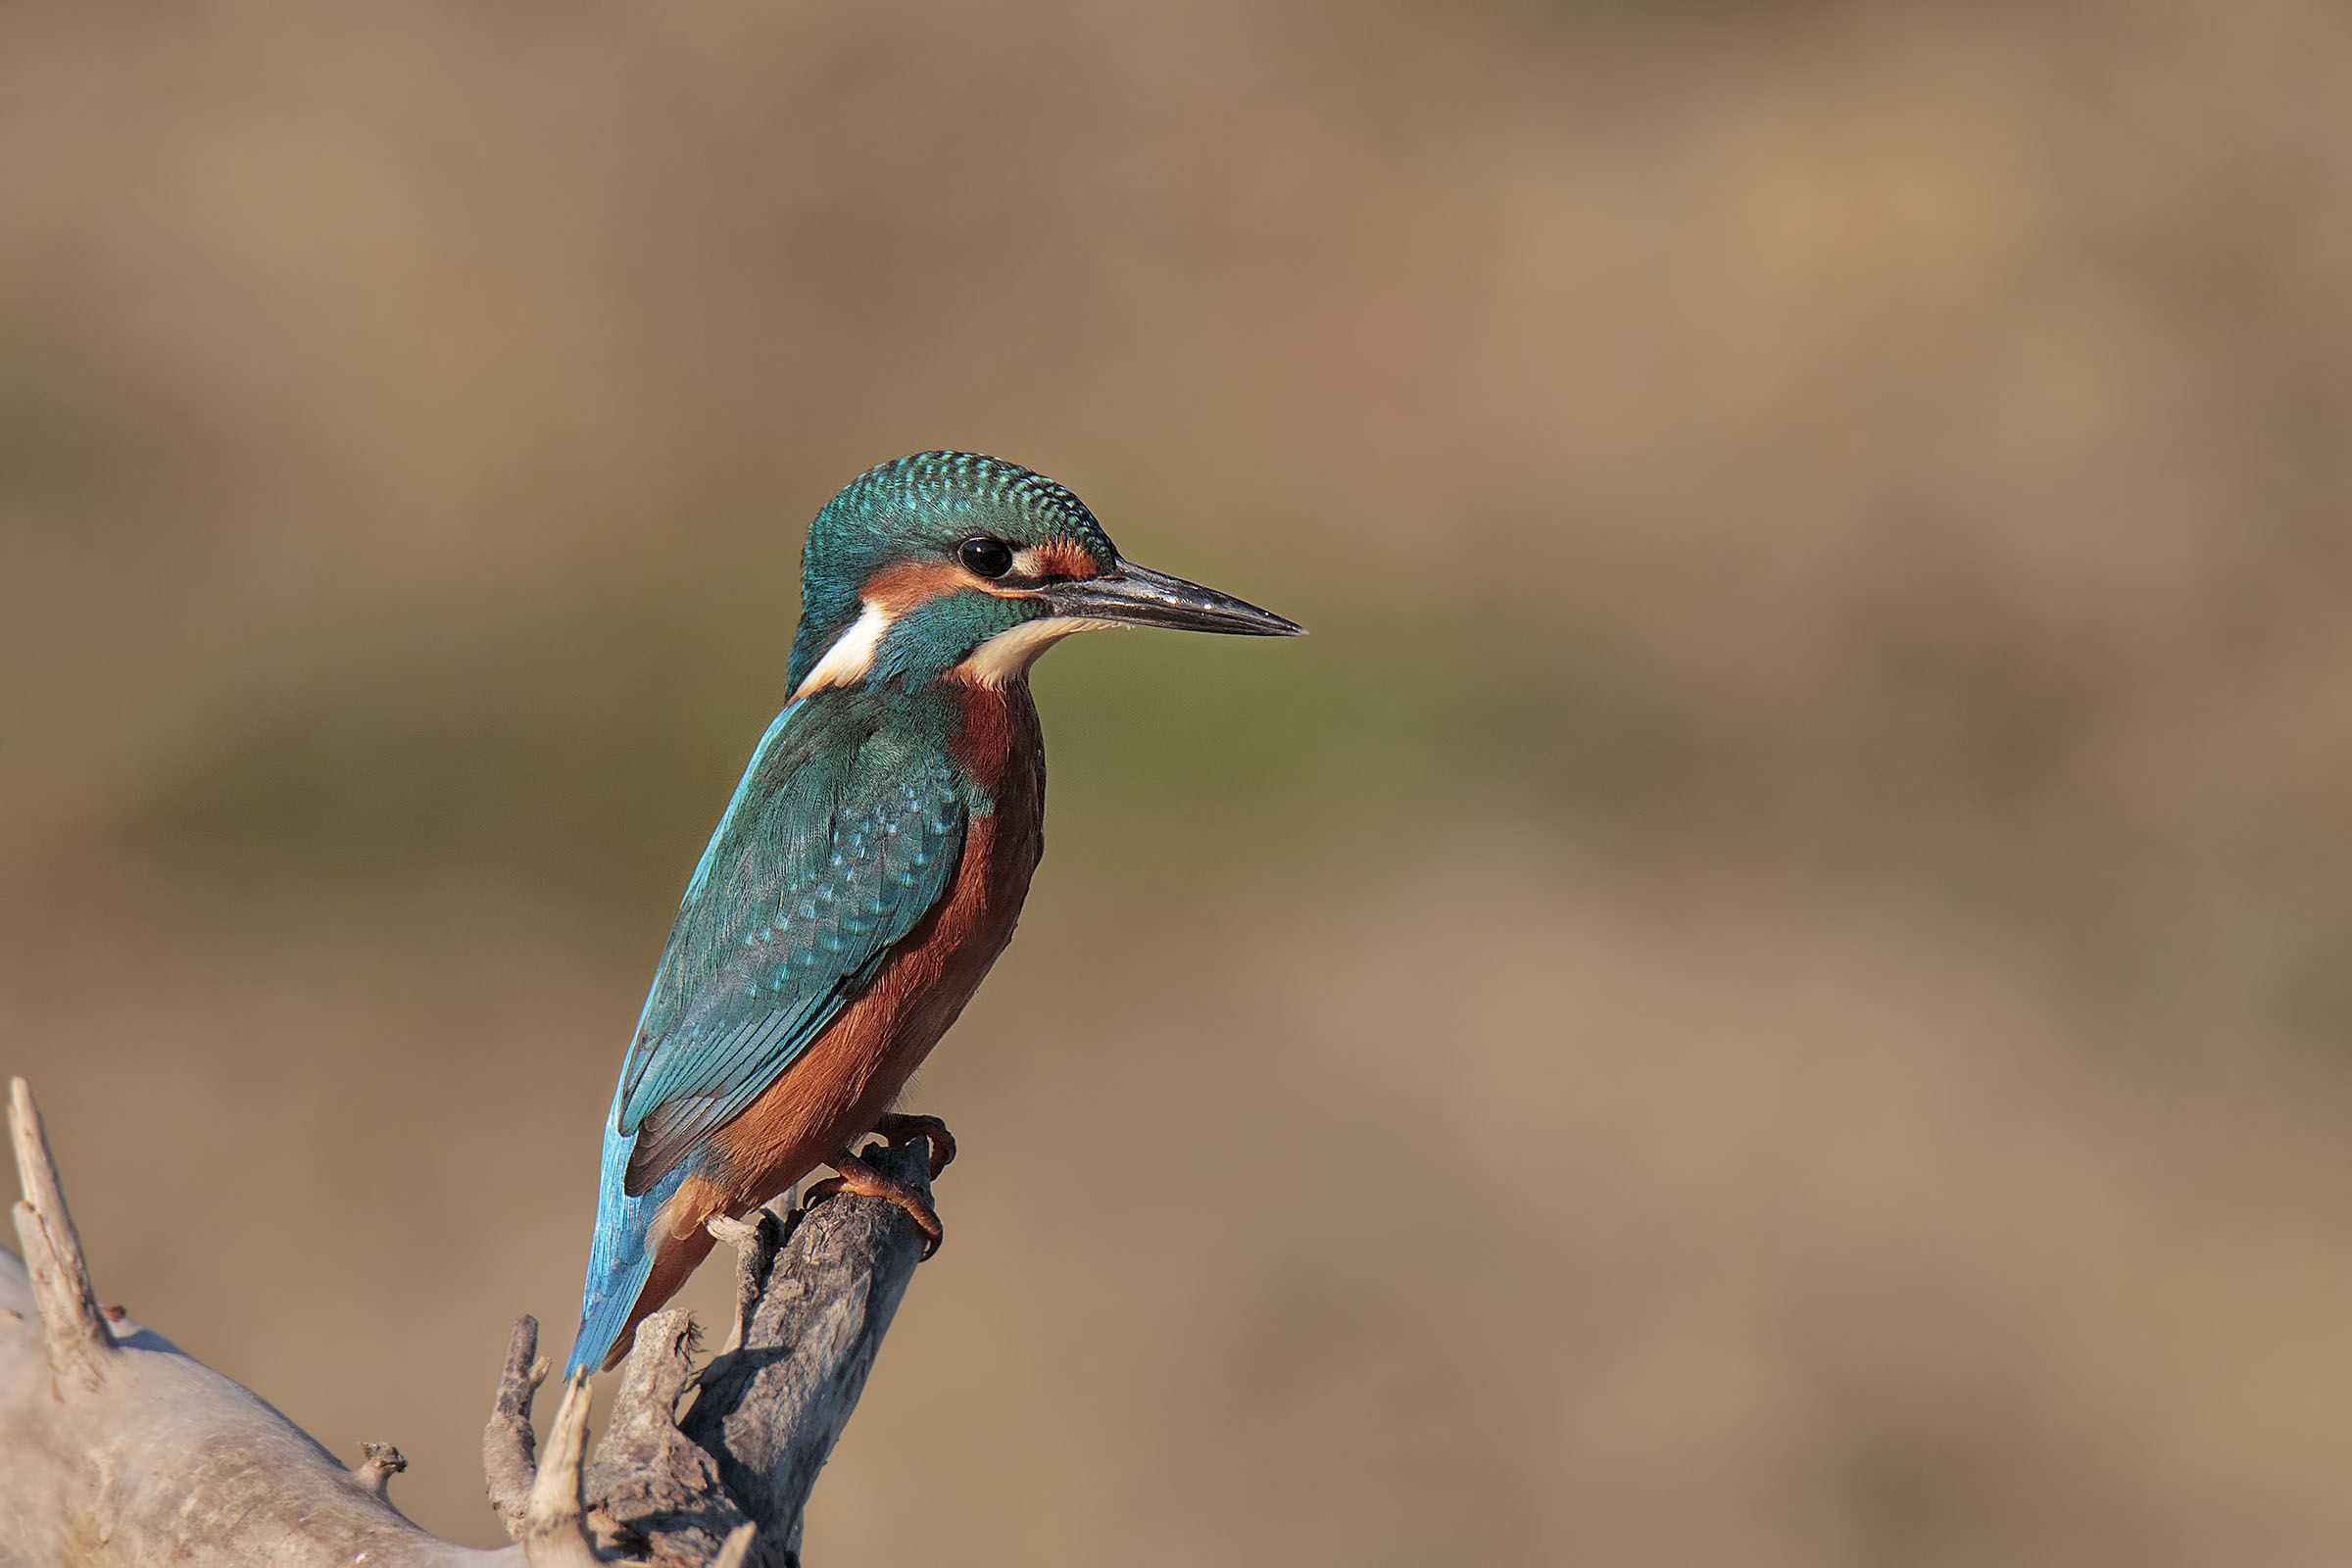 First Kingfisher of the year...